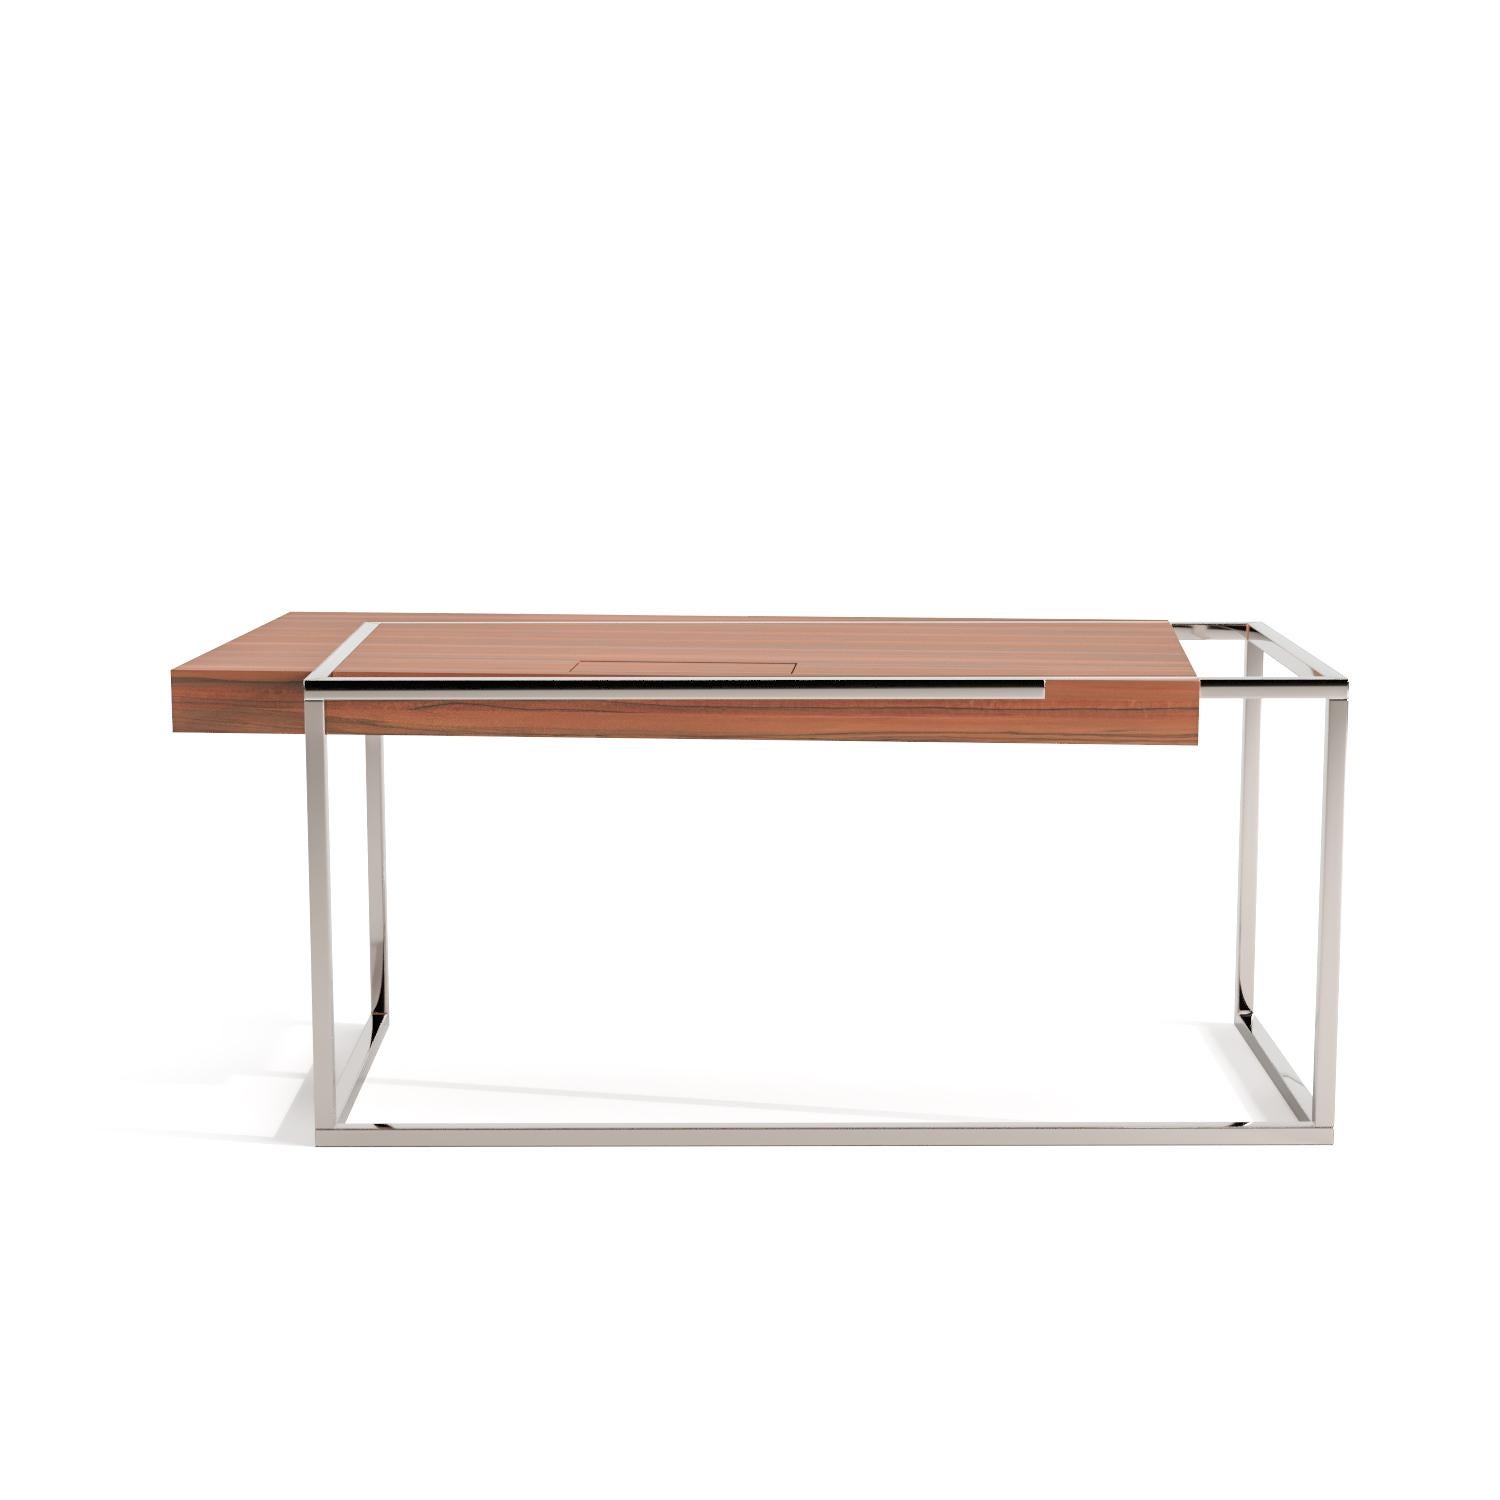 The executive desk ExCentric 2.0 listed here is made in tineo wood and brushed stainless steel. However, we can produce this in customized options: 
Structure: Stainless steel (polished or brushed); brass (polished or brushed).
Tabletop: Another